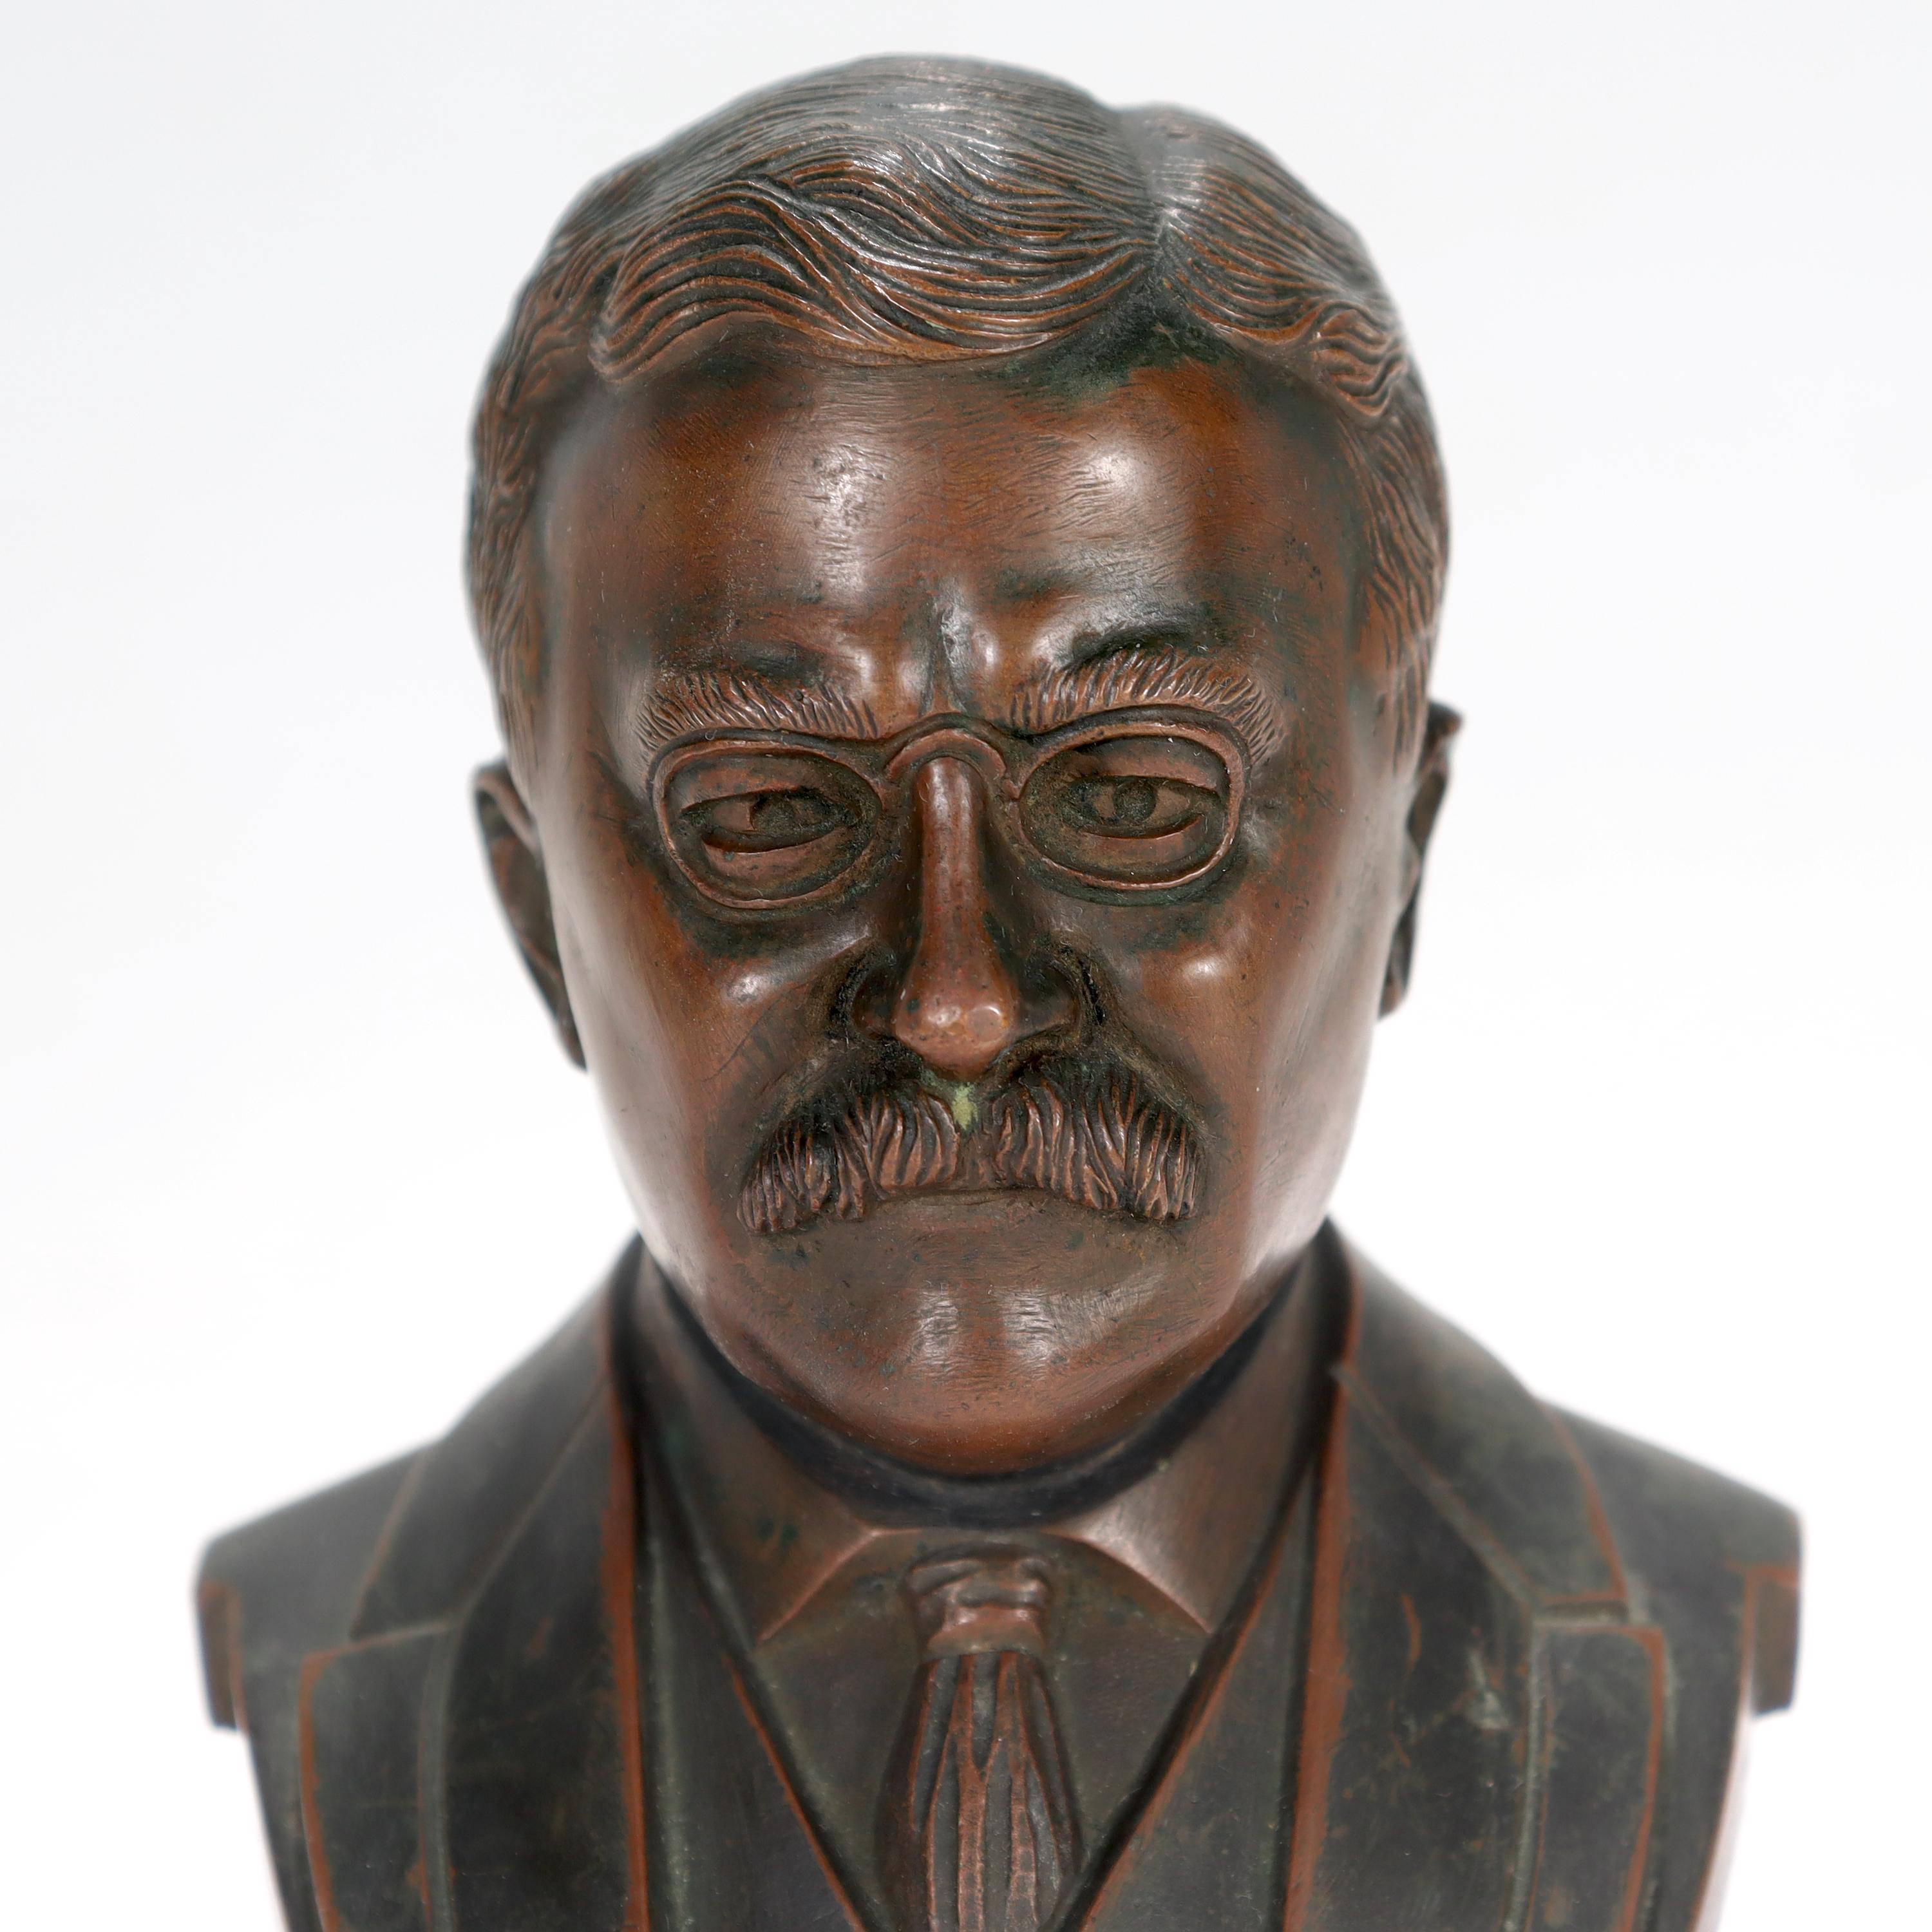 Small Desk or Cabinet Sized Bronze Bust of President Theodore 'Teddy' Roosevelt 1